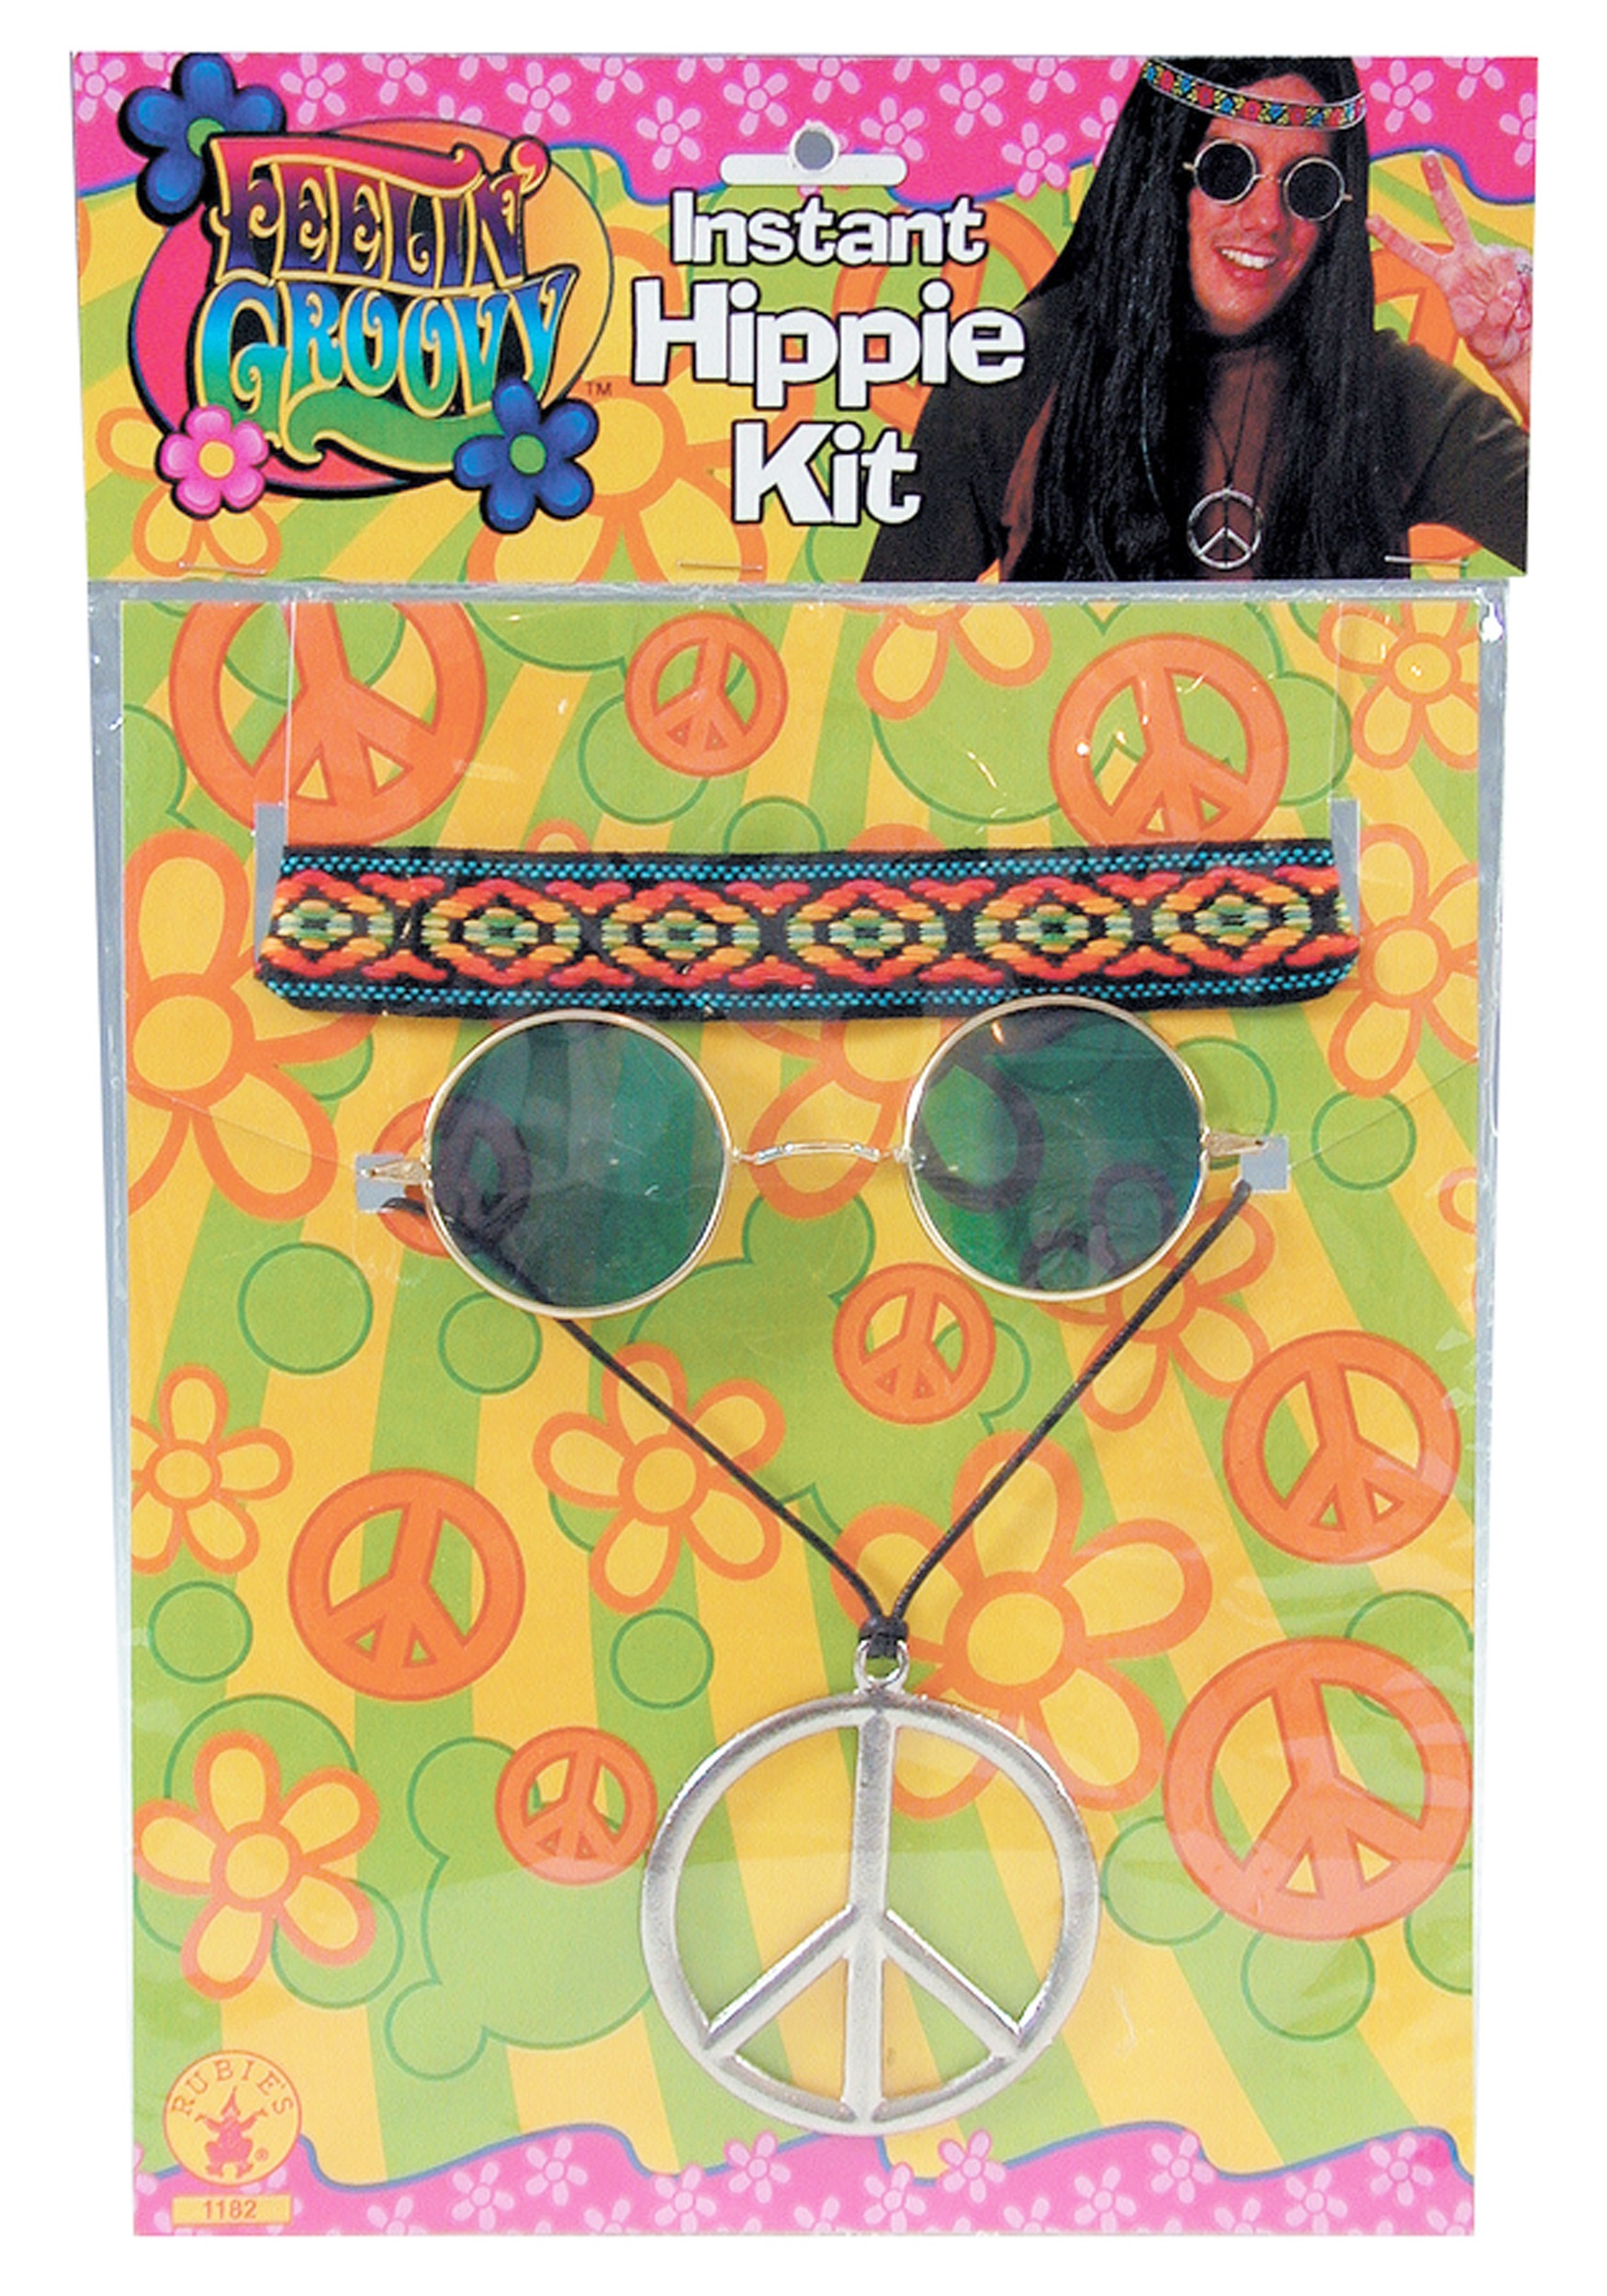 Retro Hippie Adult Accessory Kit , Fancy Dress Costume Accessories And DIY Kits